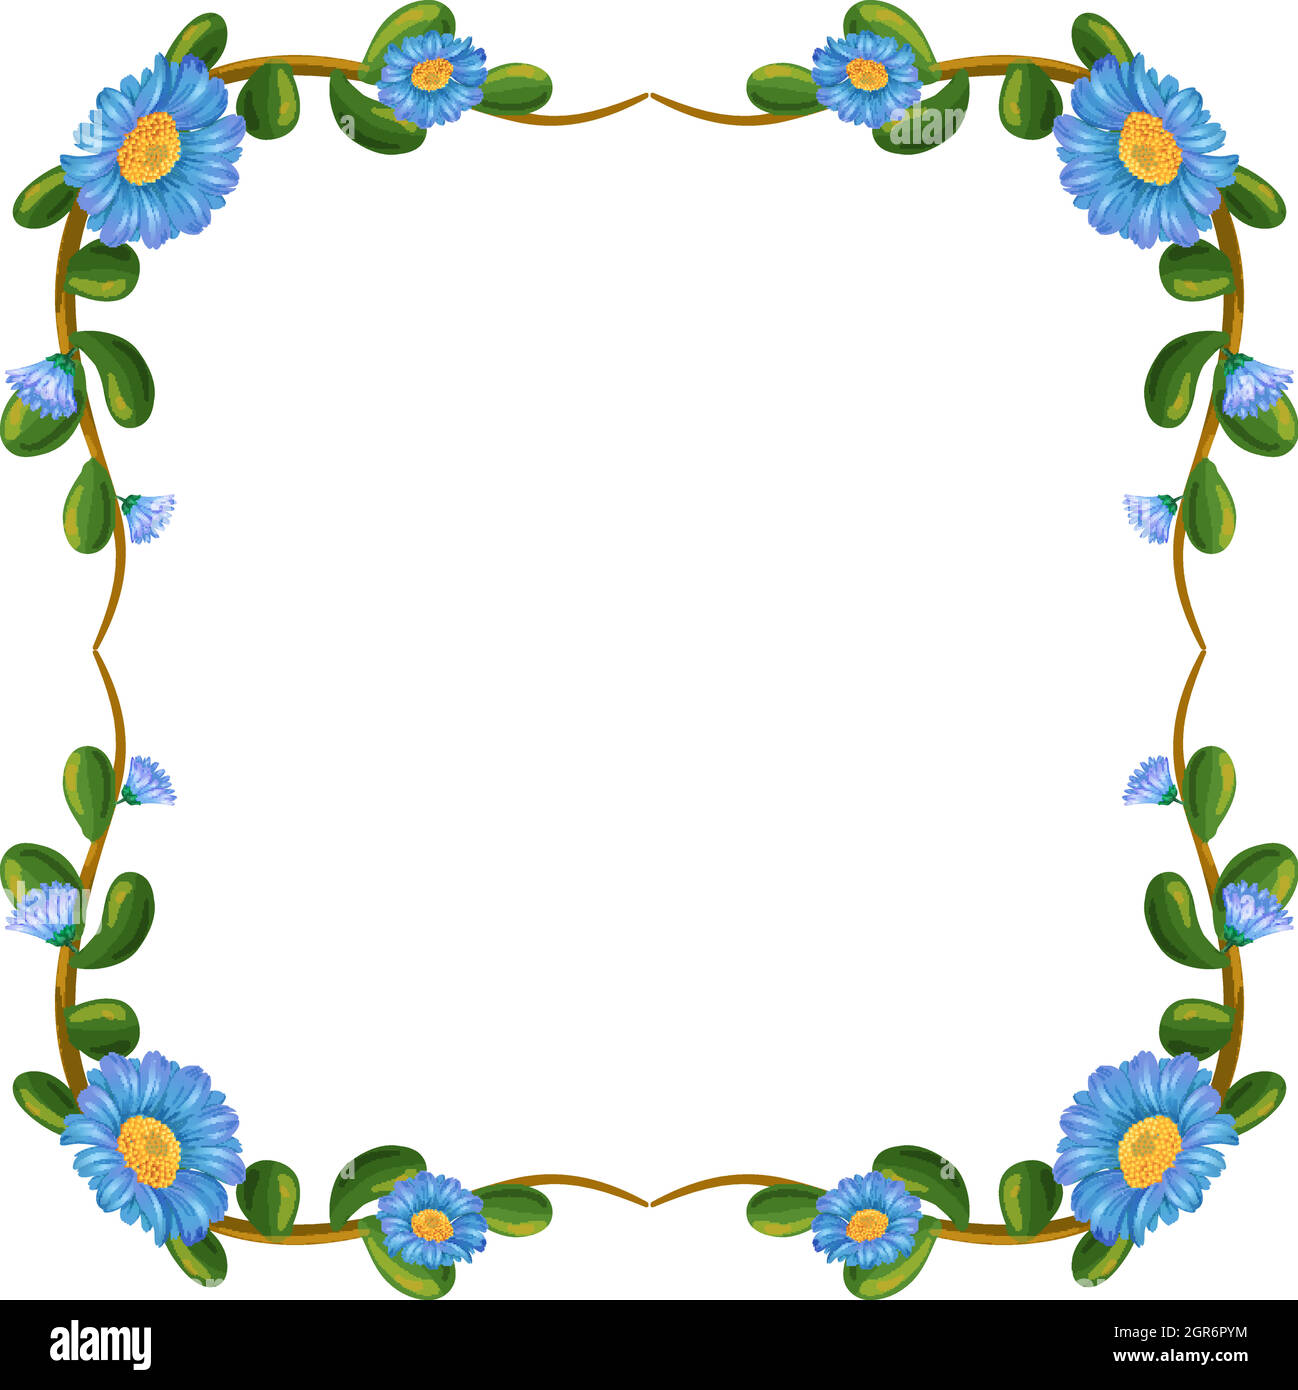 A border design with blue flowers Stock Vector